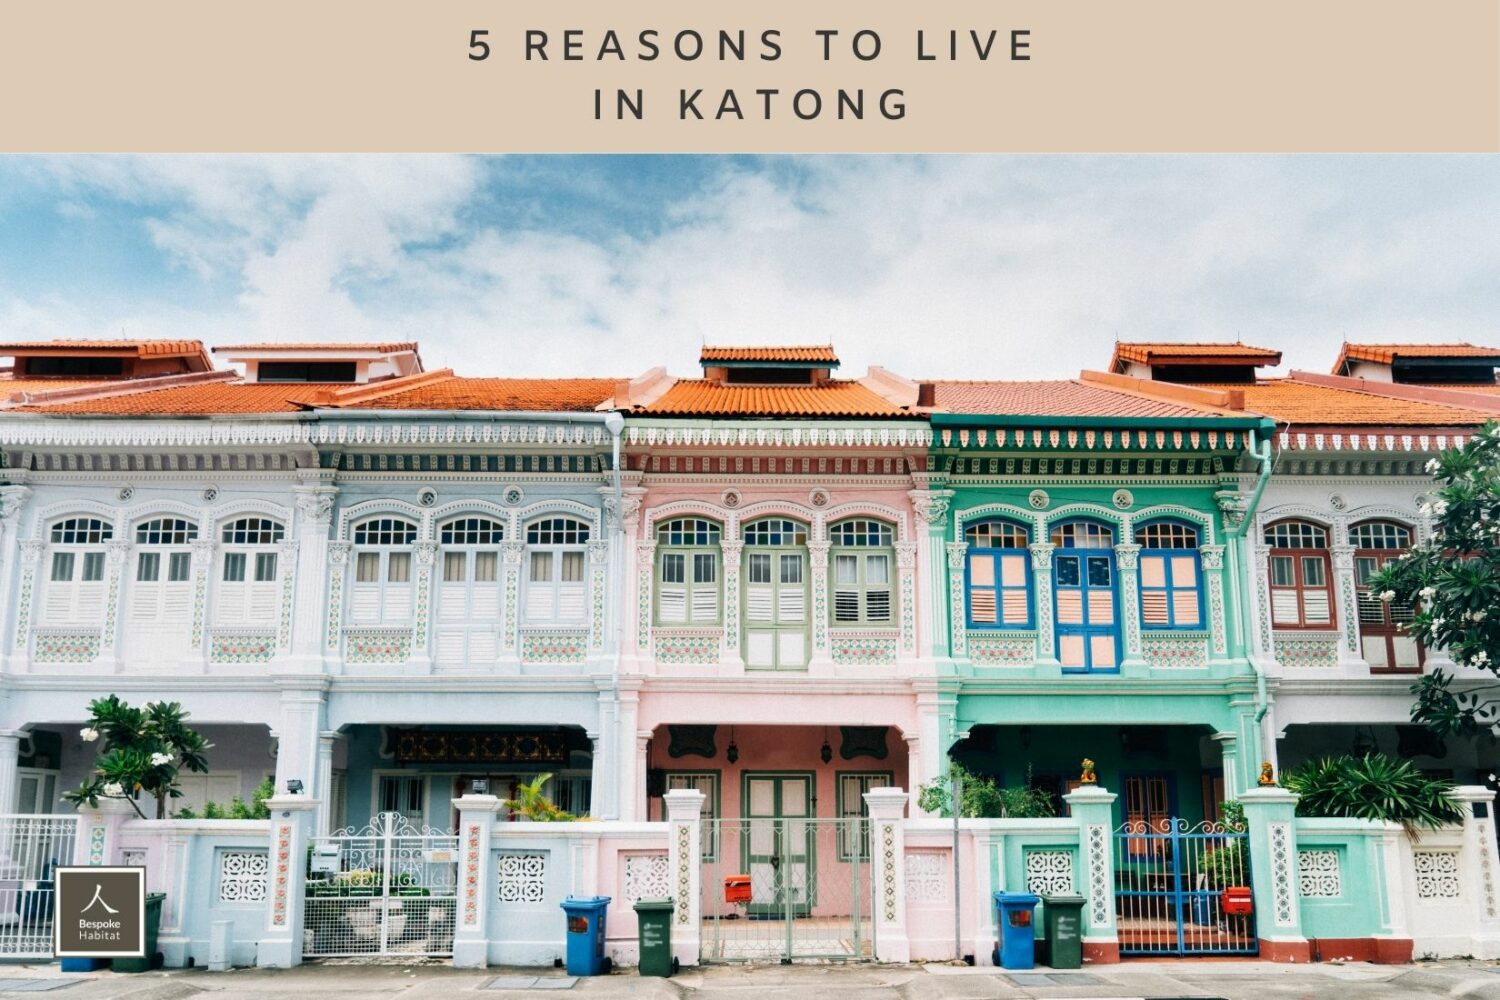 5 Reasons to Live in Katong